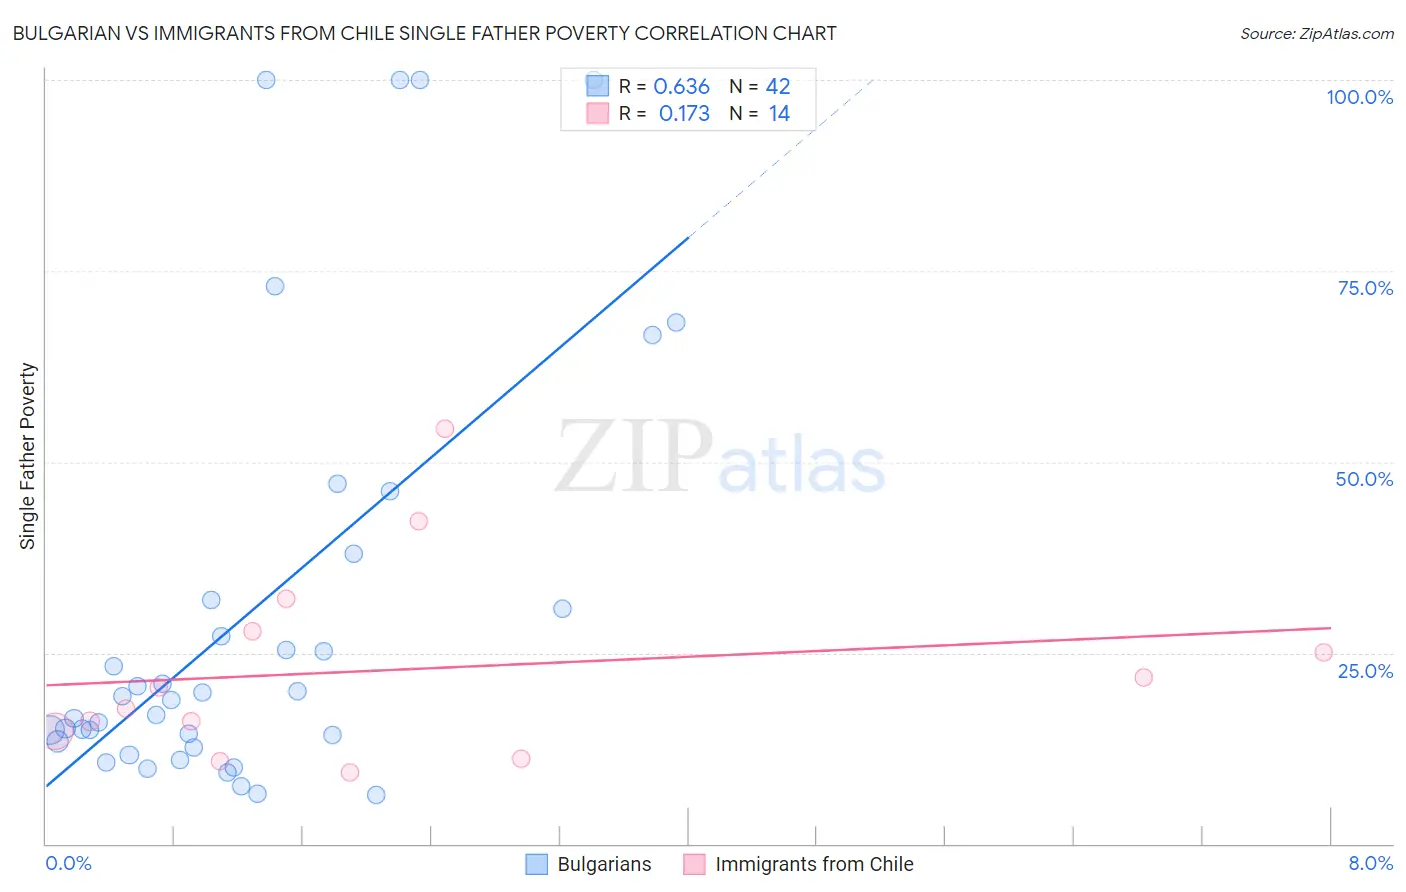 Bulgarian vs Immigrants from Chile Single Father Poverty